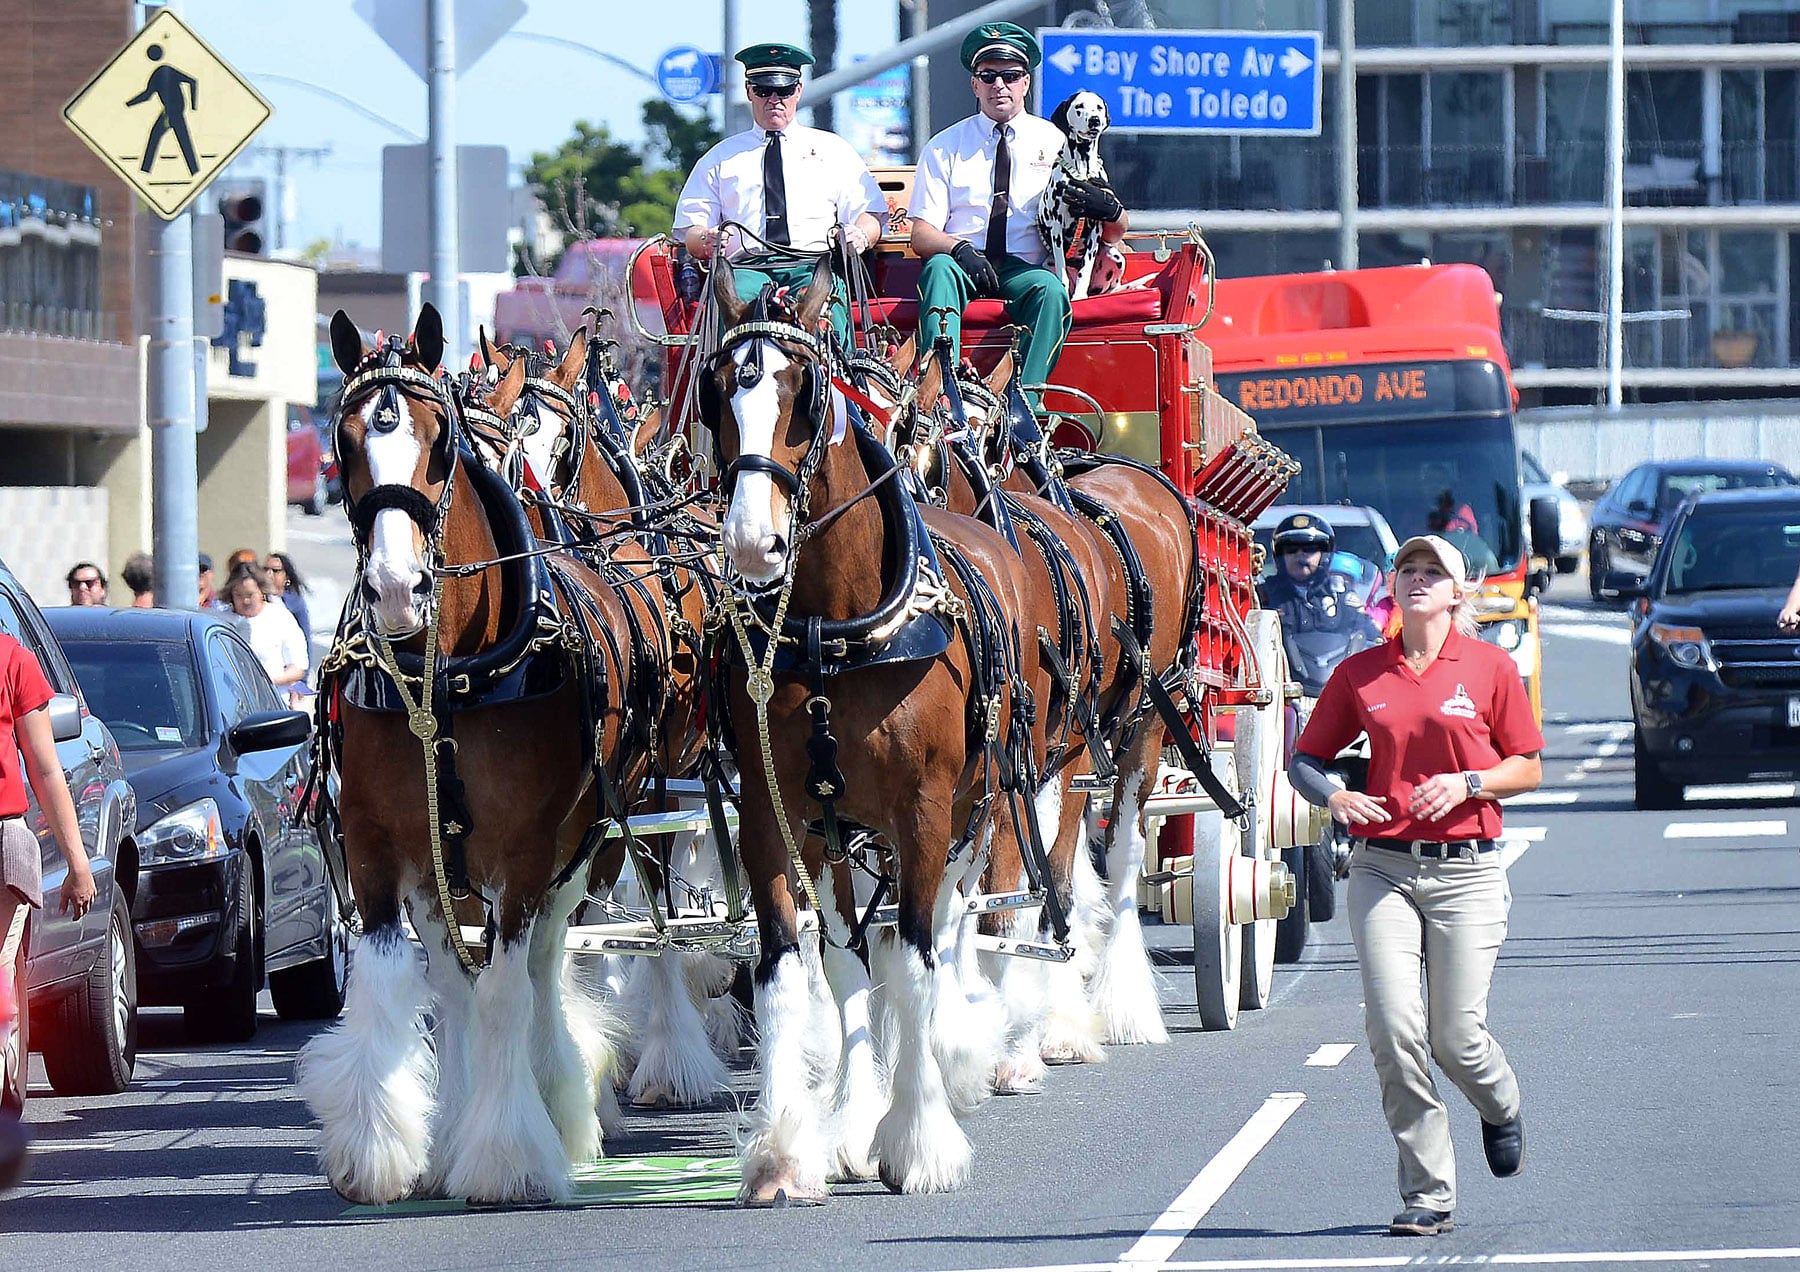 Budweiser Clydesdales Make Their Way Down 2nd Street In Belmont Shore ? Long Beach Post photo